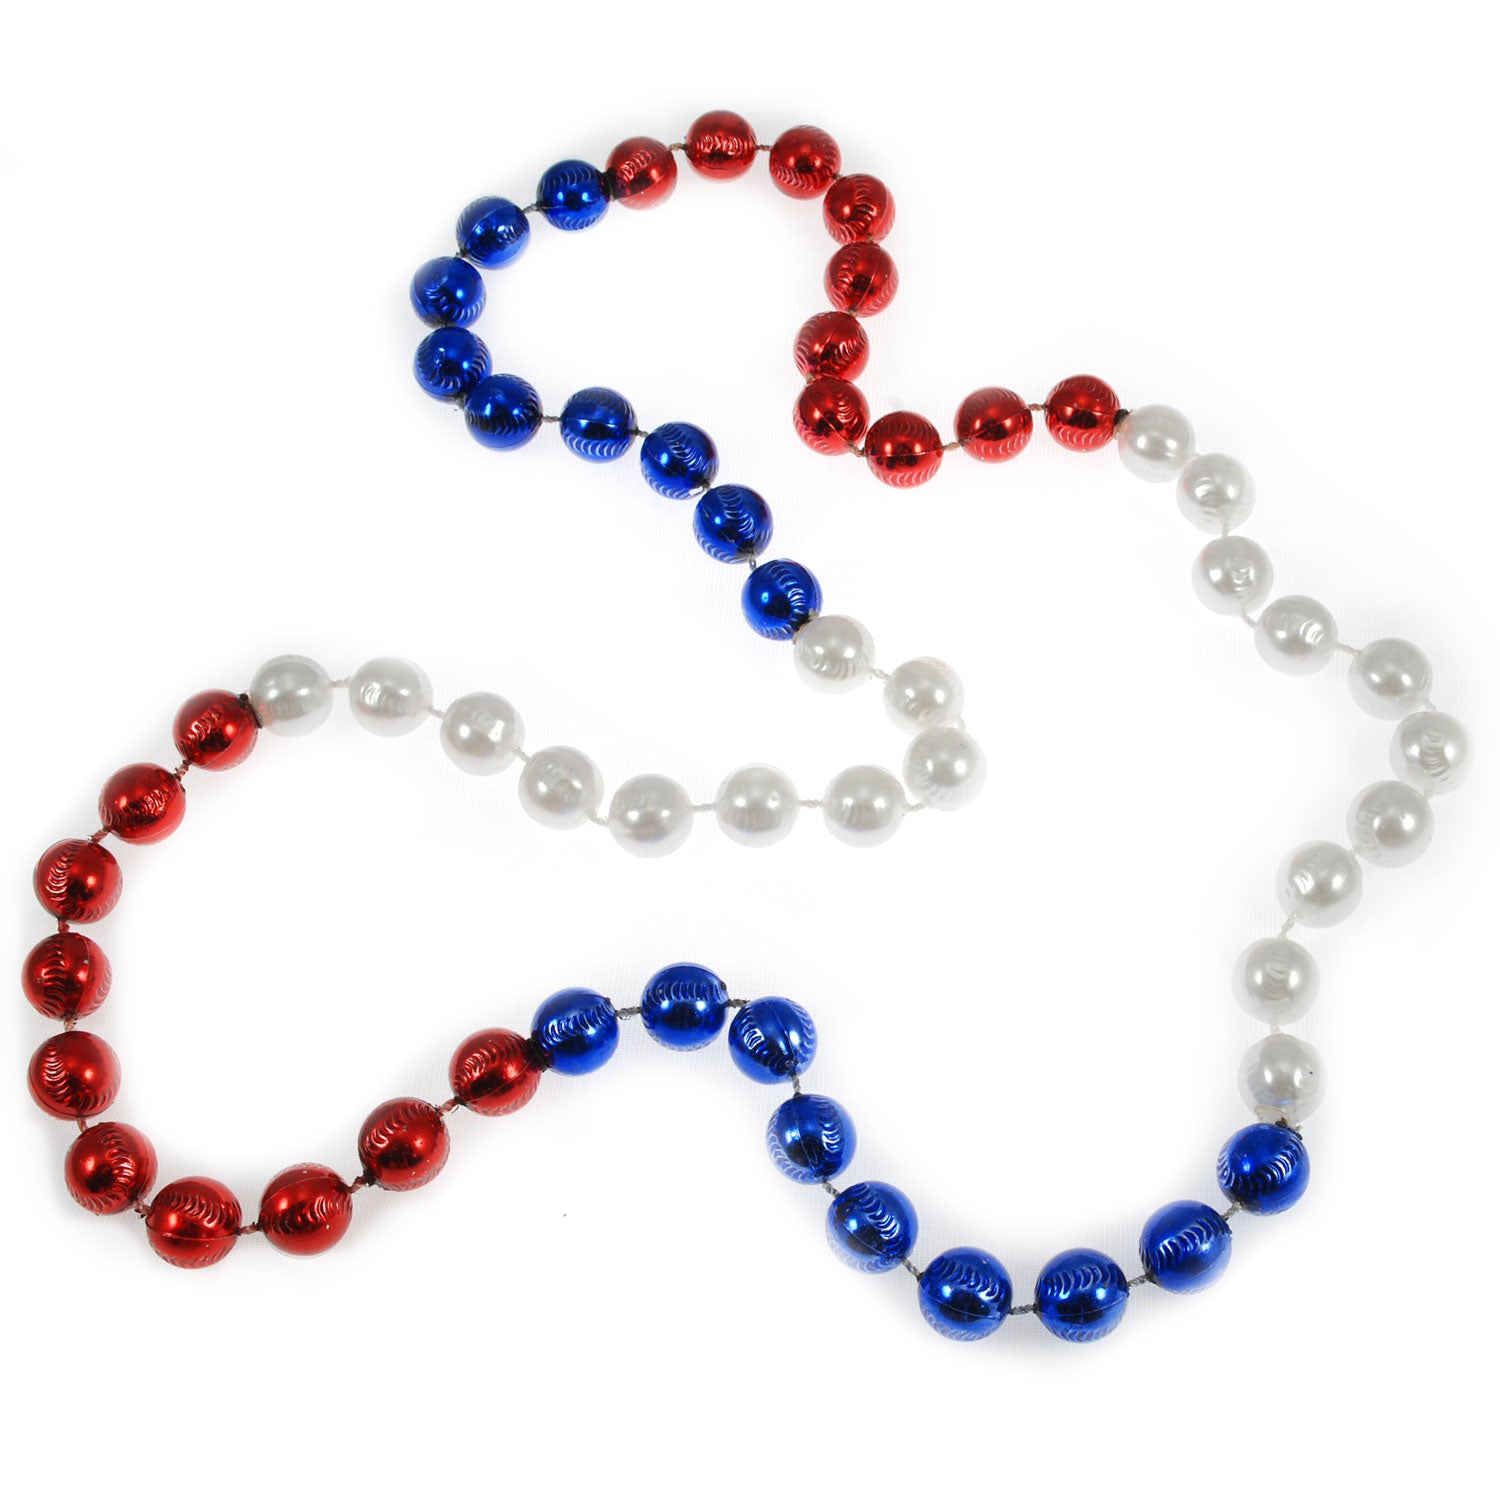 Baseball Beads Strung on a Patriotic Red, White & Blue Necklaces from Beads  by the Dozen